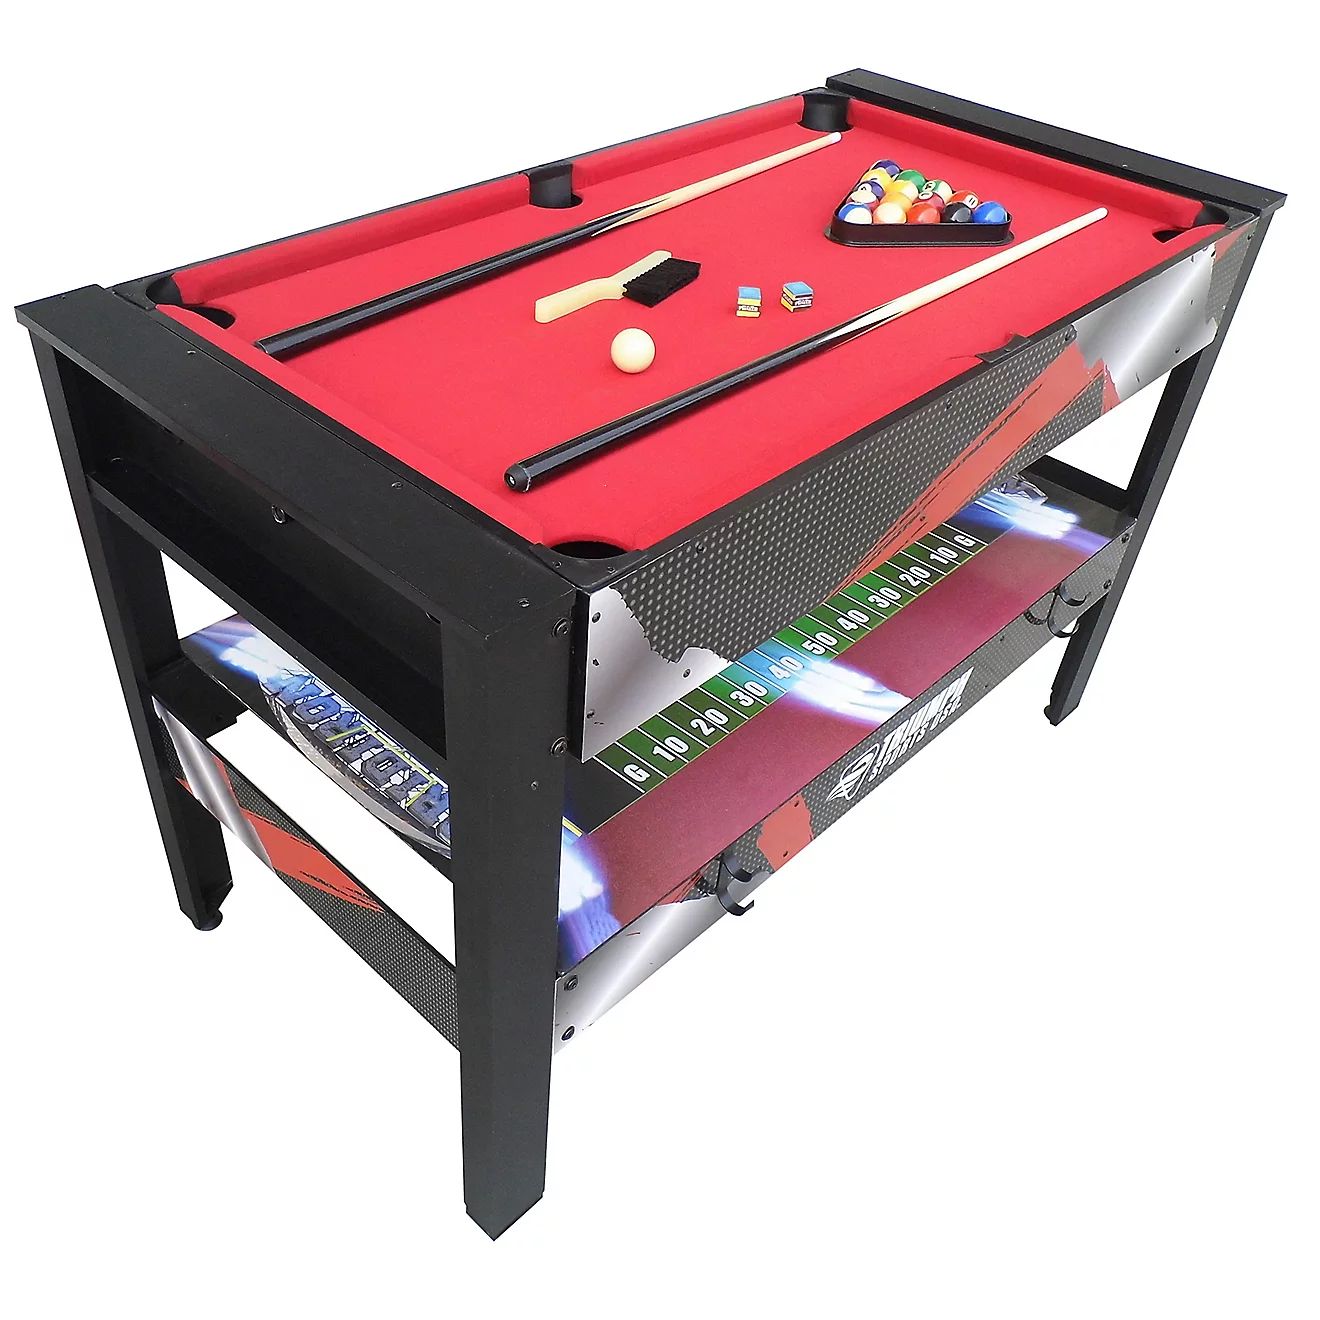 Triumph Sports USA 48" 4-in-1 Swivel Table | Academy | Academy Sports + Outdoors